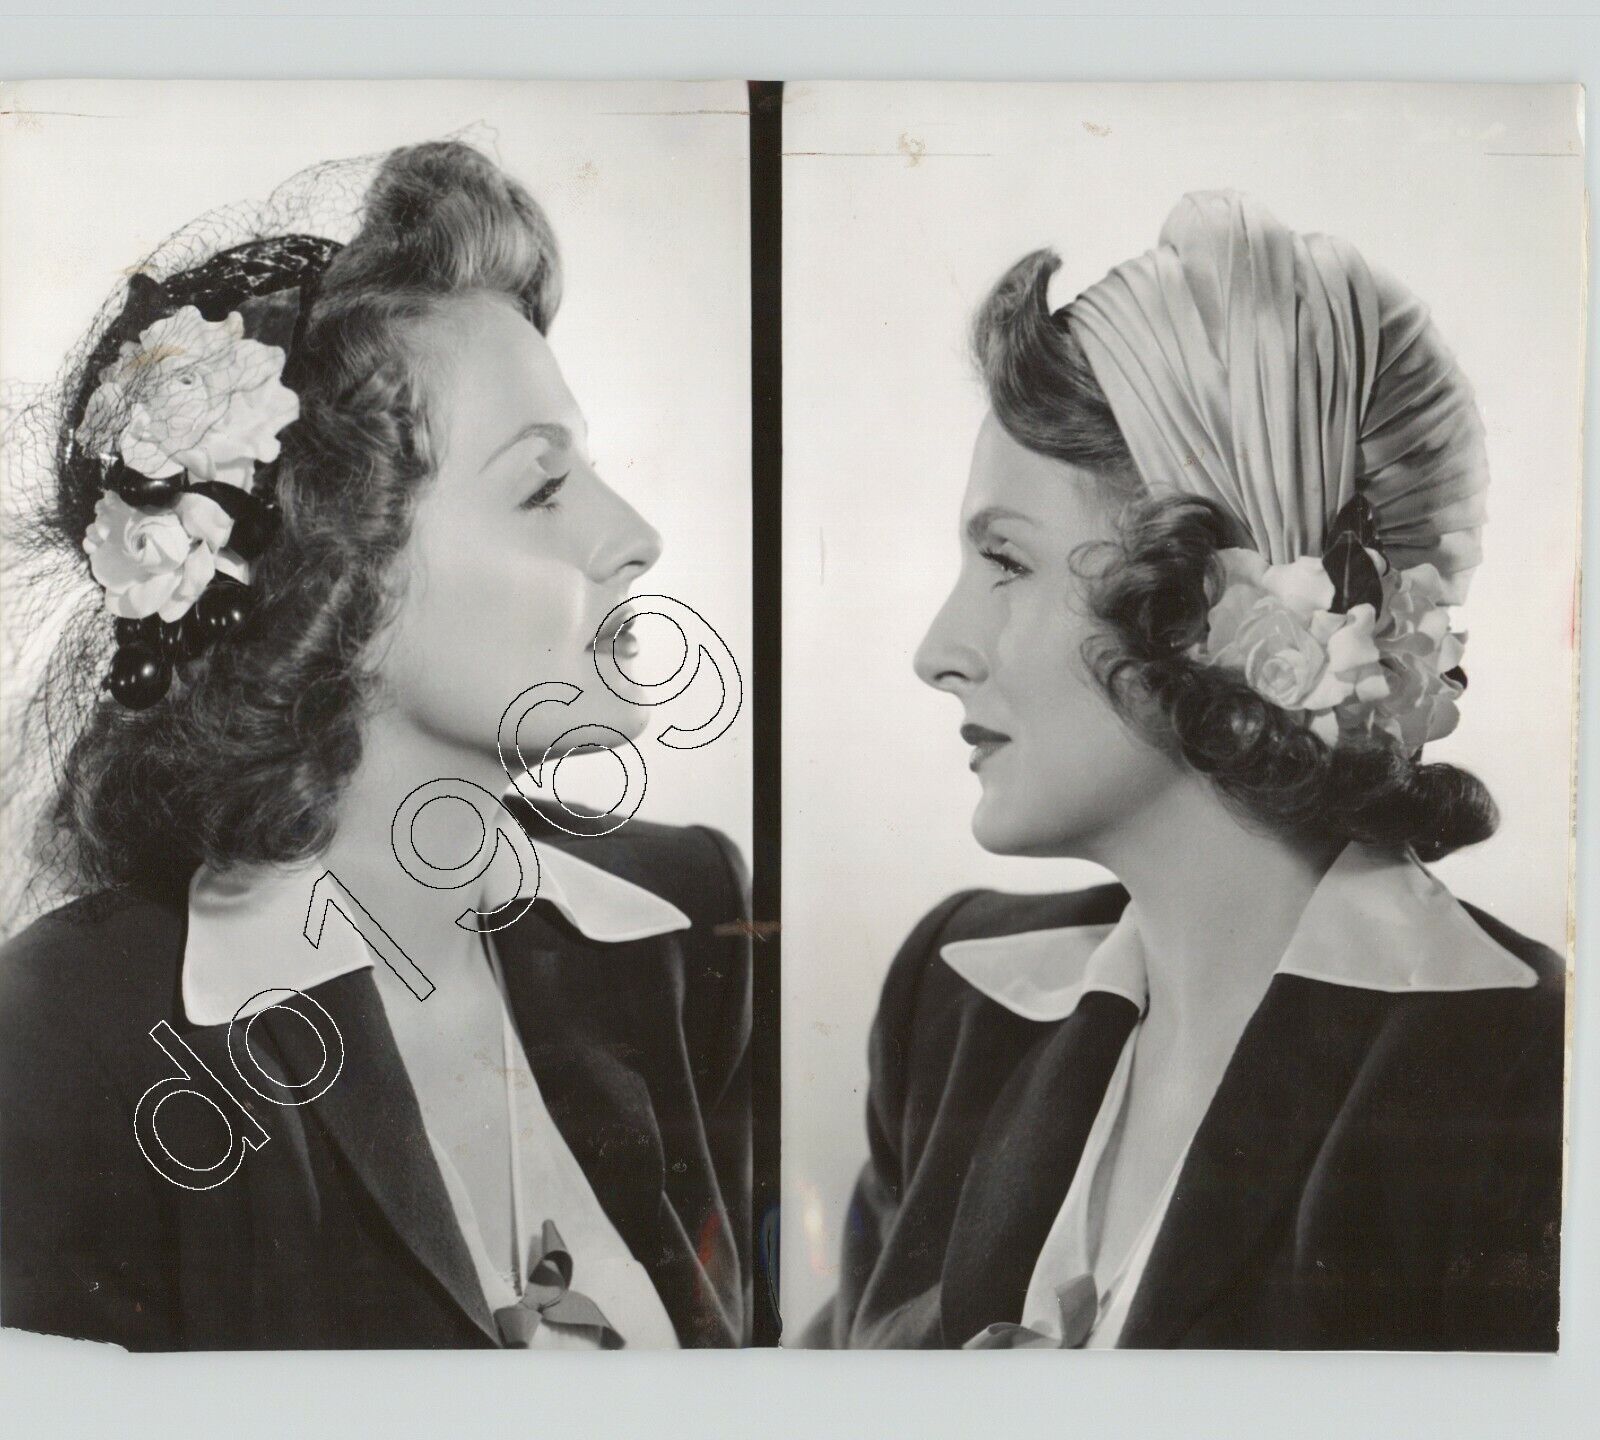 Actress CONSTANCE MOORE In Women’s Fashion Shoot Hat Vintage 1944 Press Photo